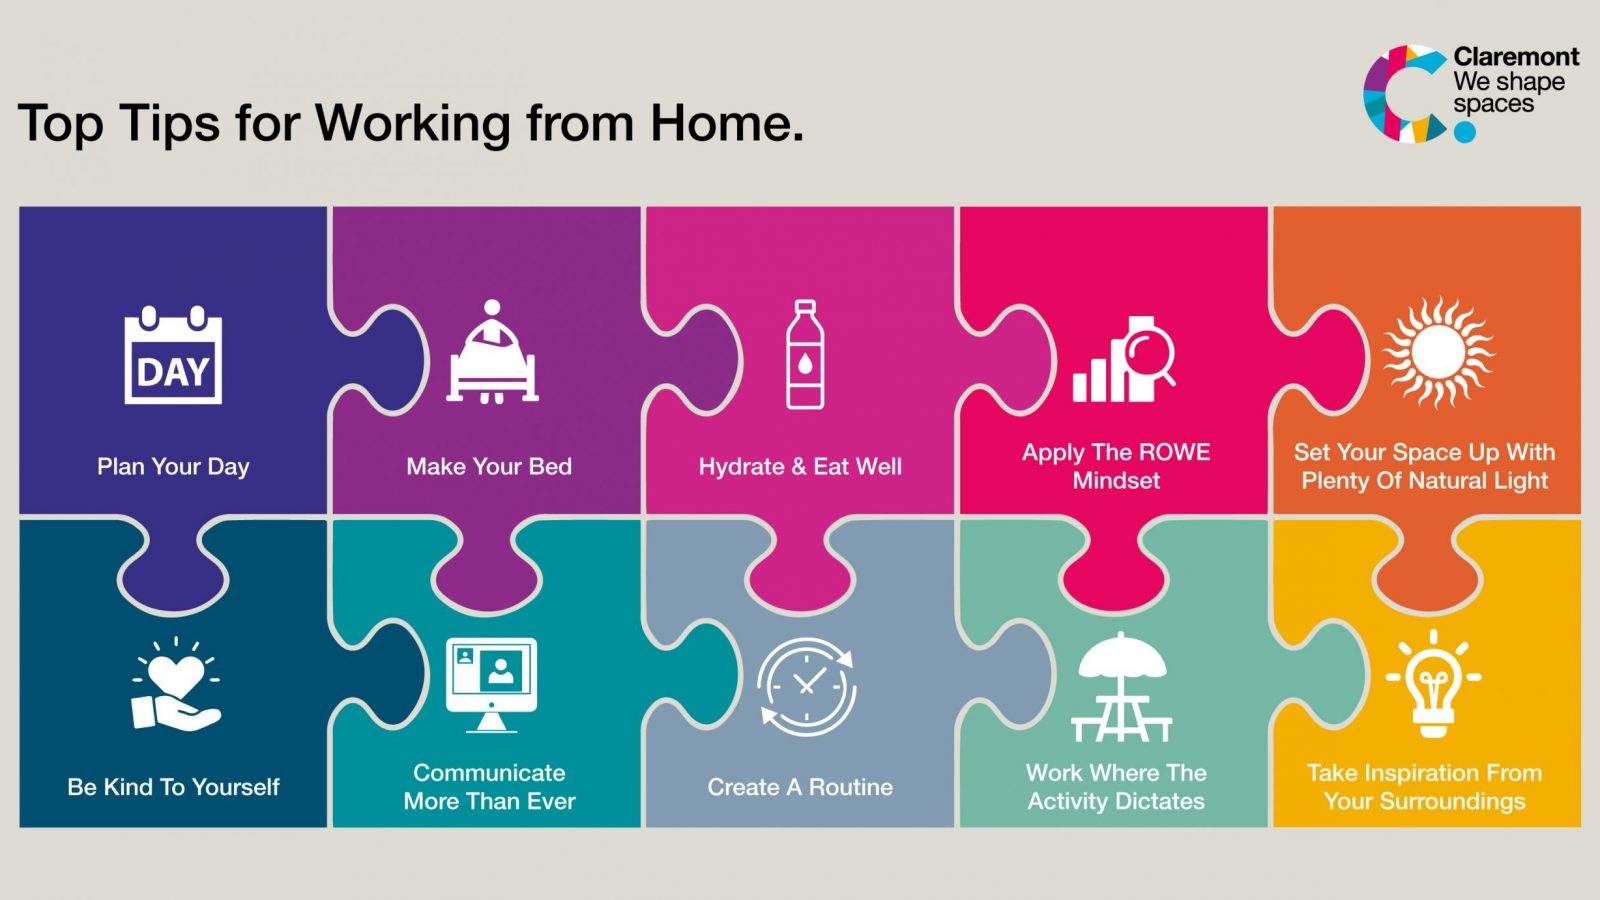 Our top 10 tips for working from home.